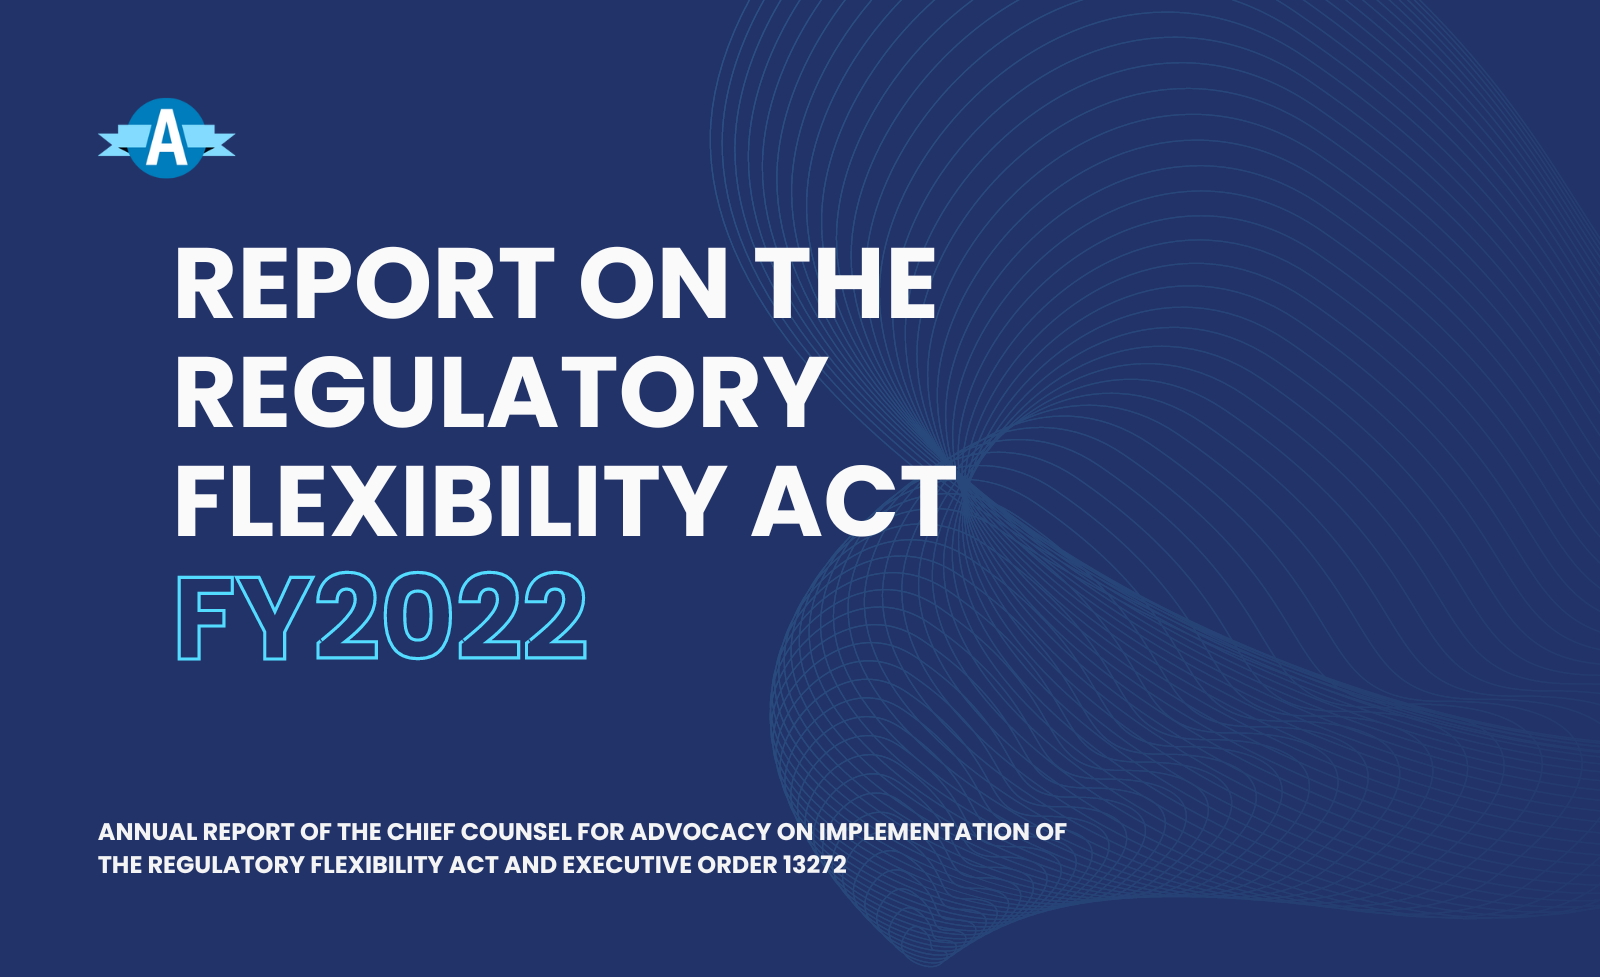 Report on the Regulatory Flexibility Act FY22 Annual Report of the Chief Counsel for Advocacy on Implementation of the Regulatory Flexibility Act and Executive Order 13272